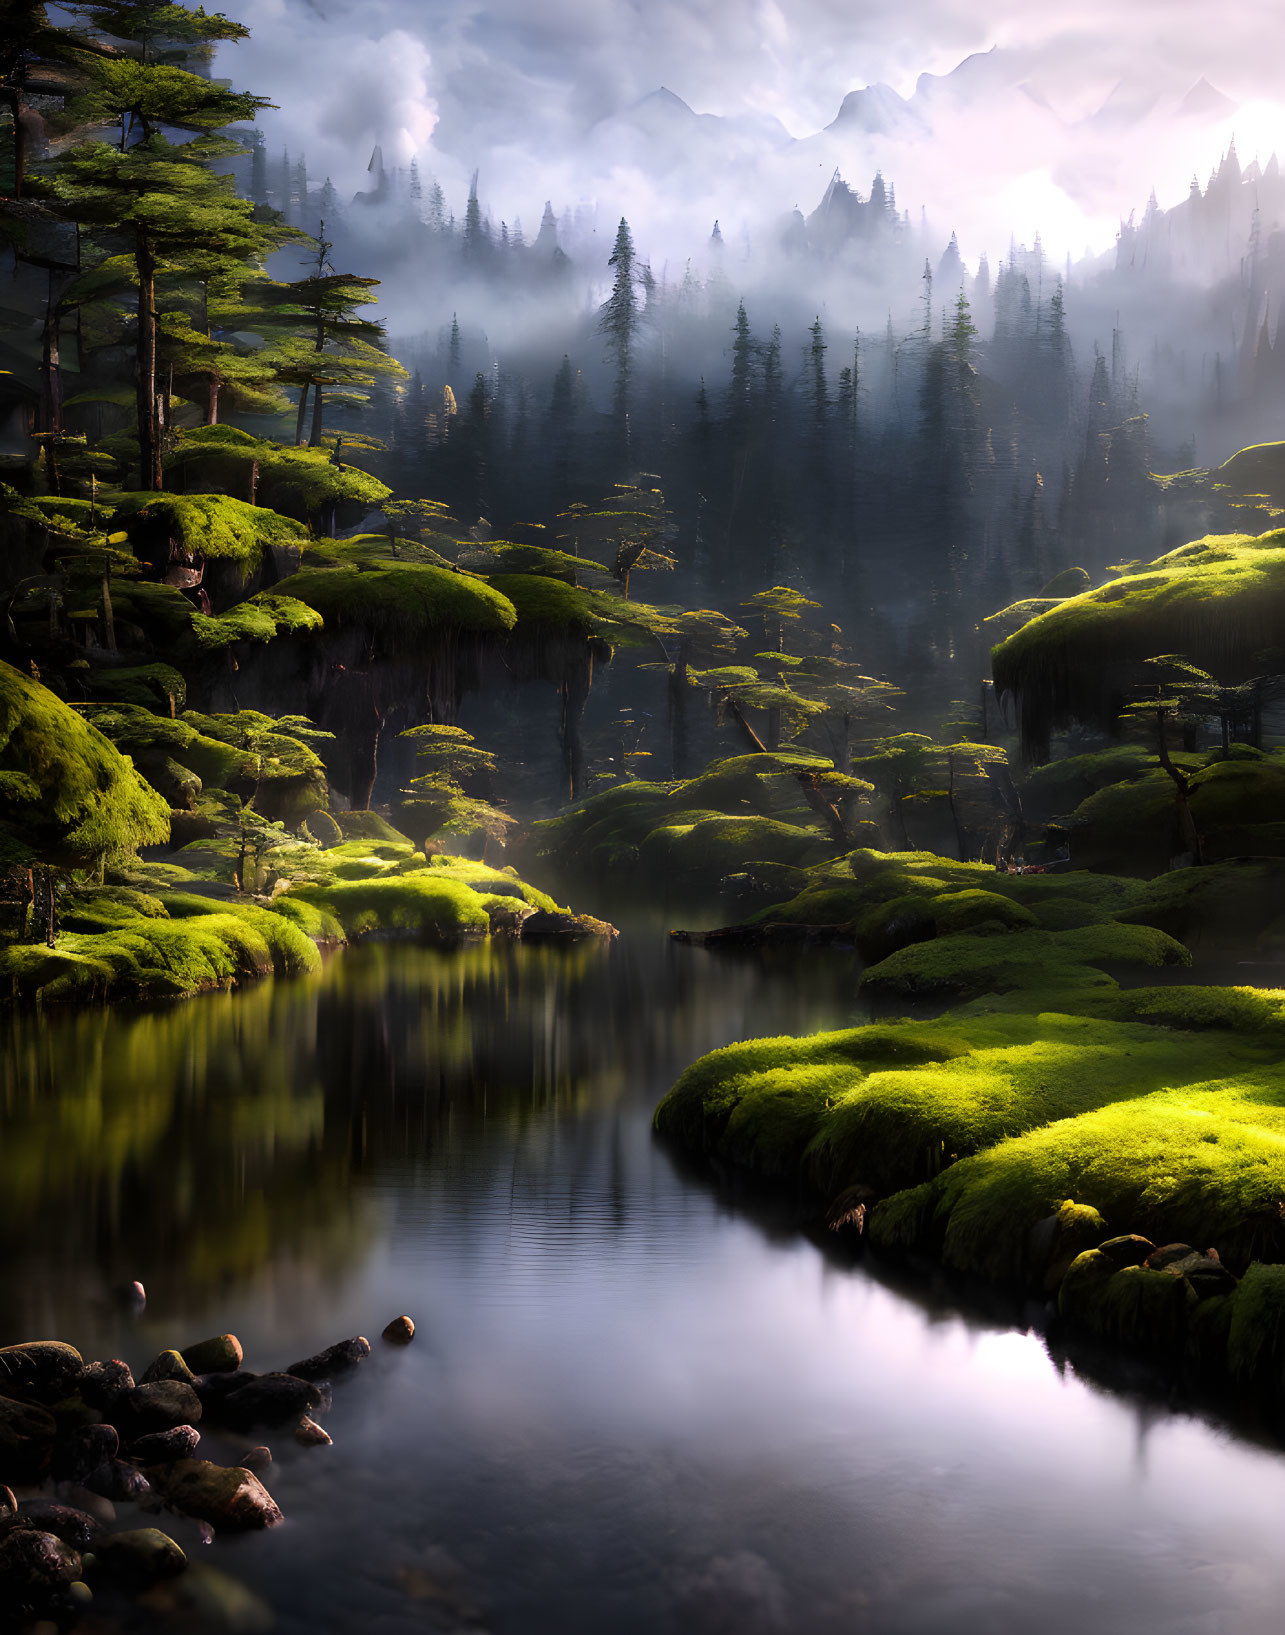 Tranquil forest scene with moss-covered trees, serene river, and mist-shrouded mountains in